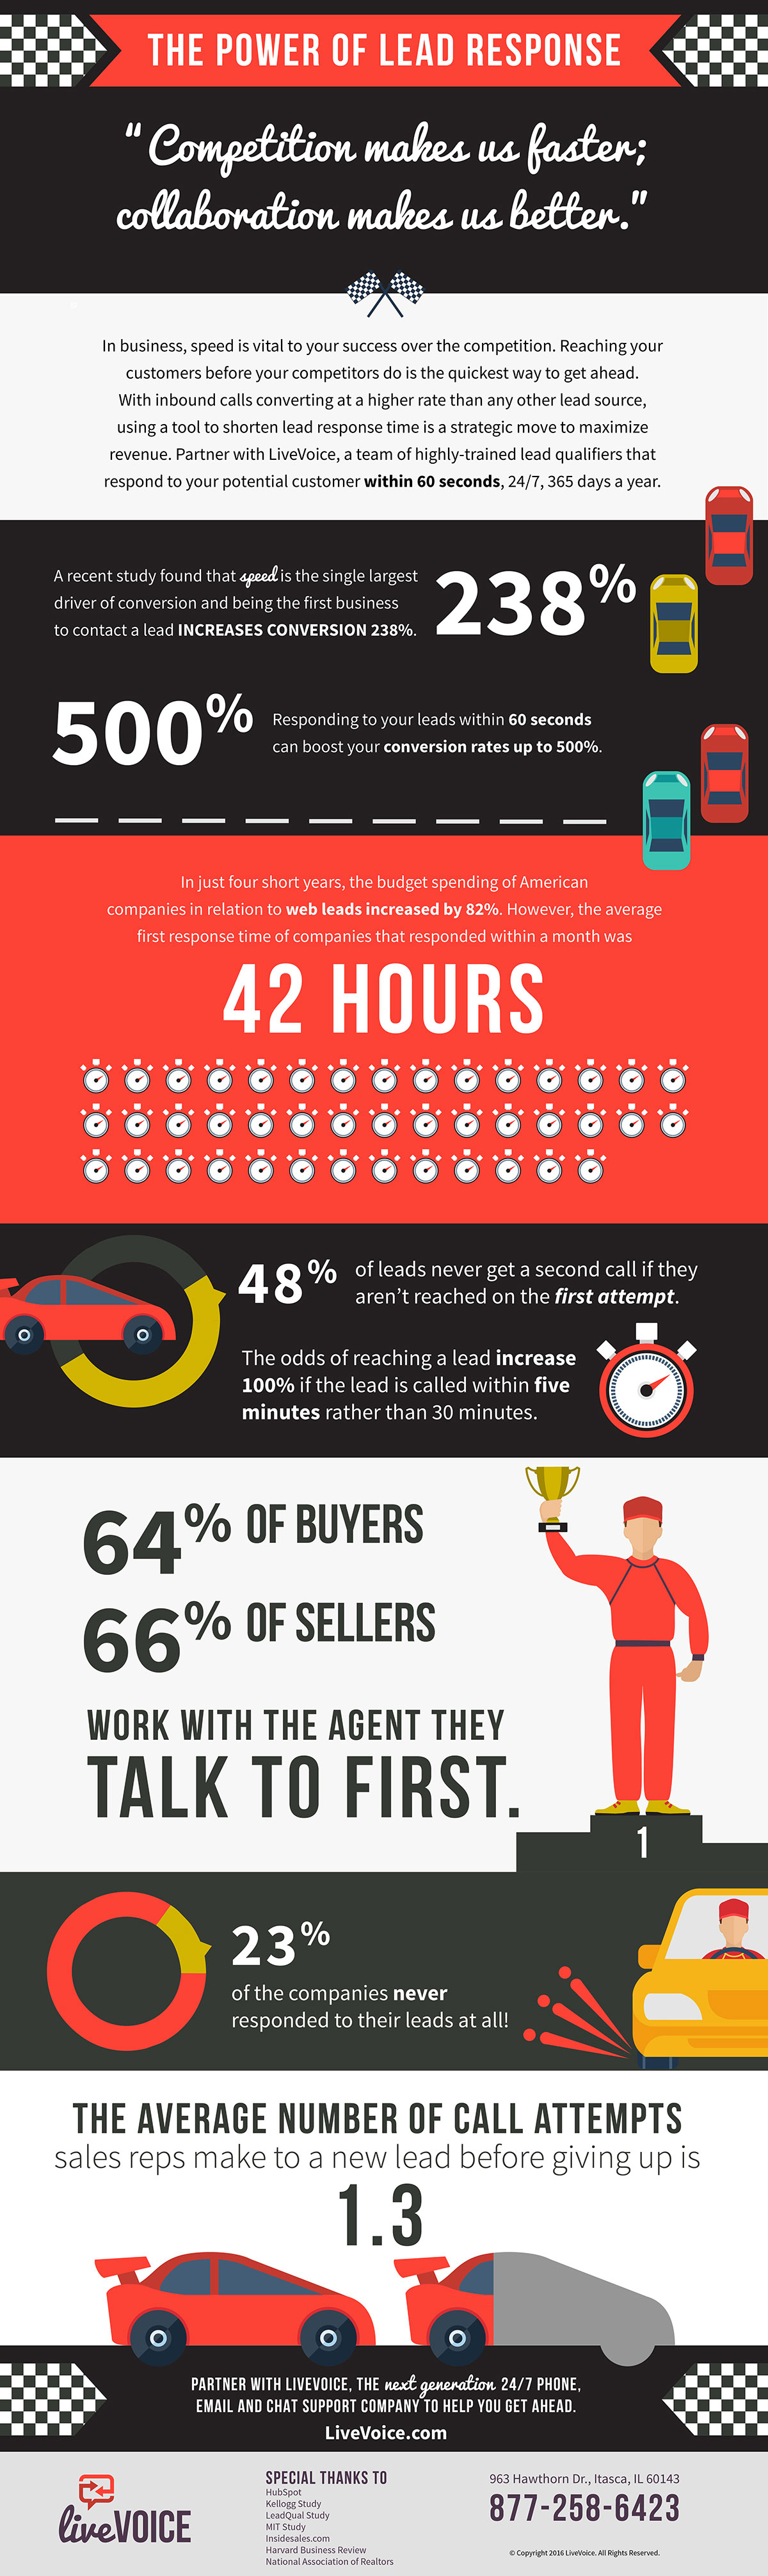 The Power of Lead Response [INFOGRAPHIC]